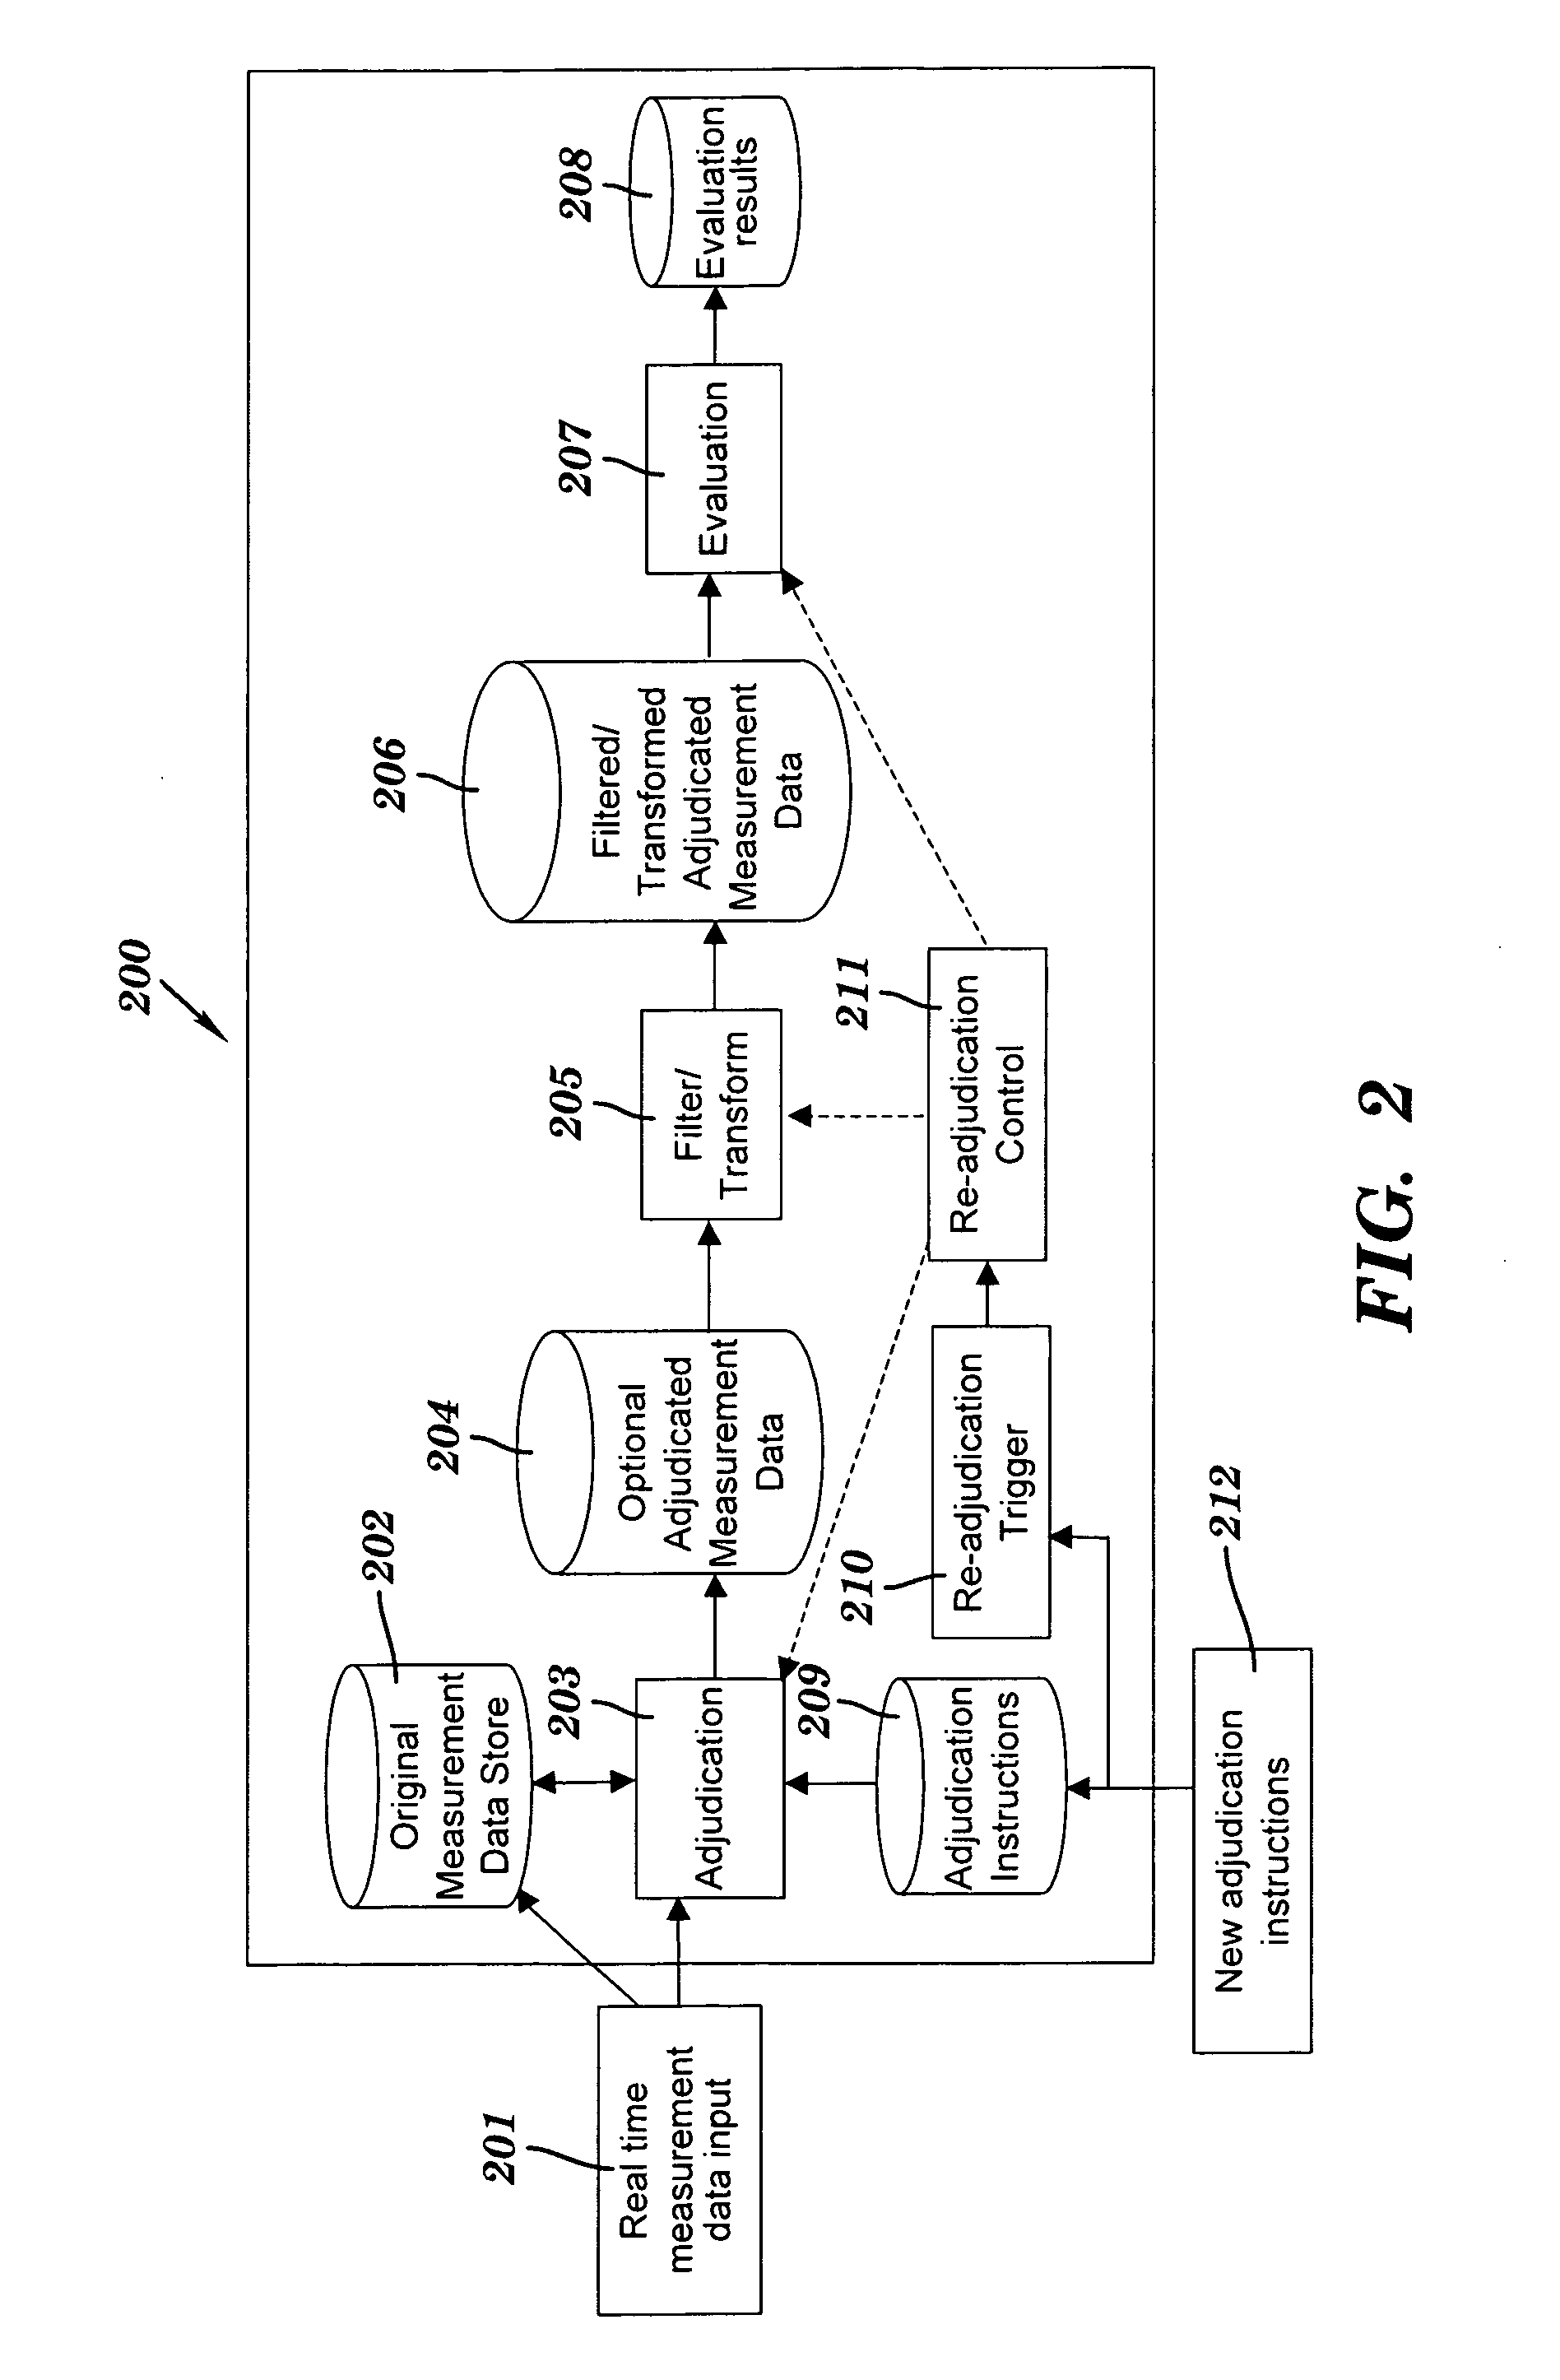 Method and system for real time measurement data adjudication and service level evaluation